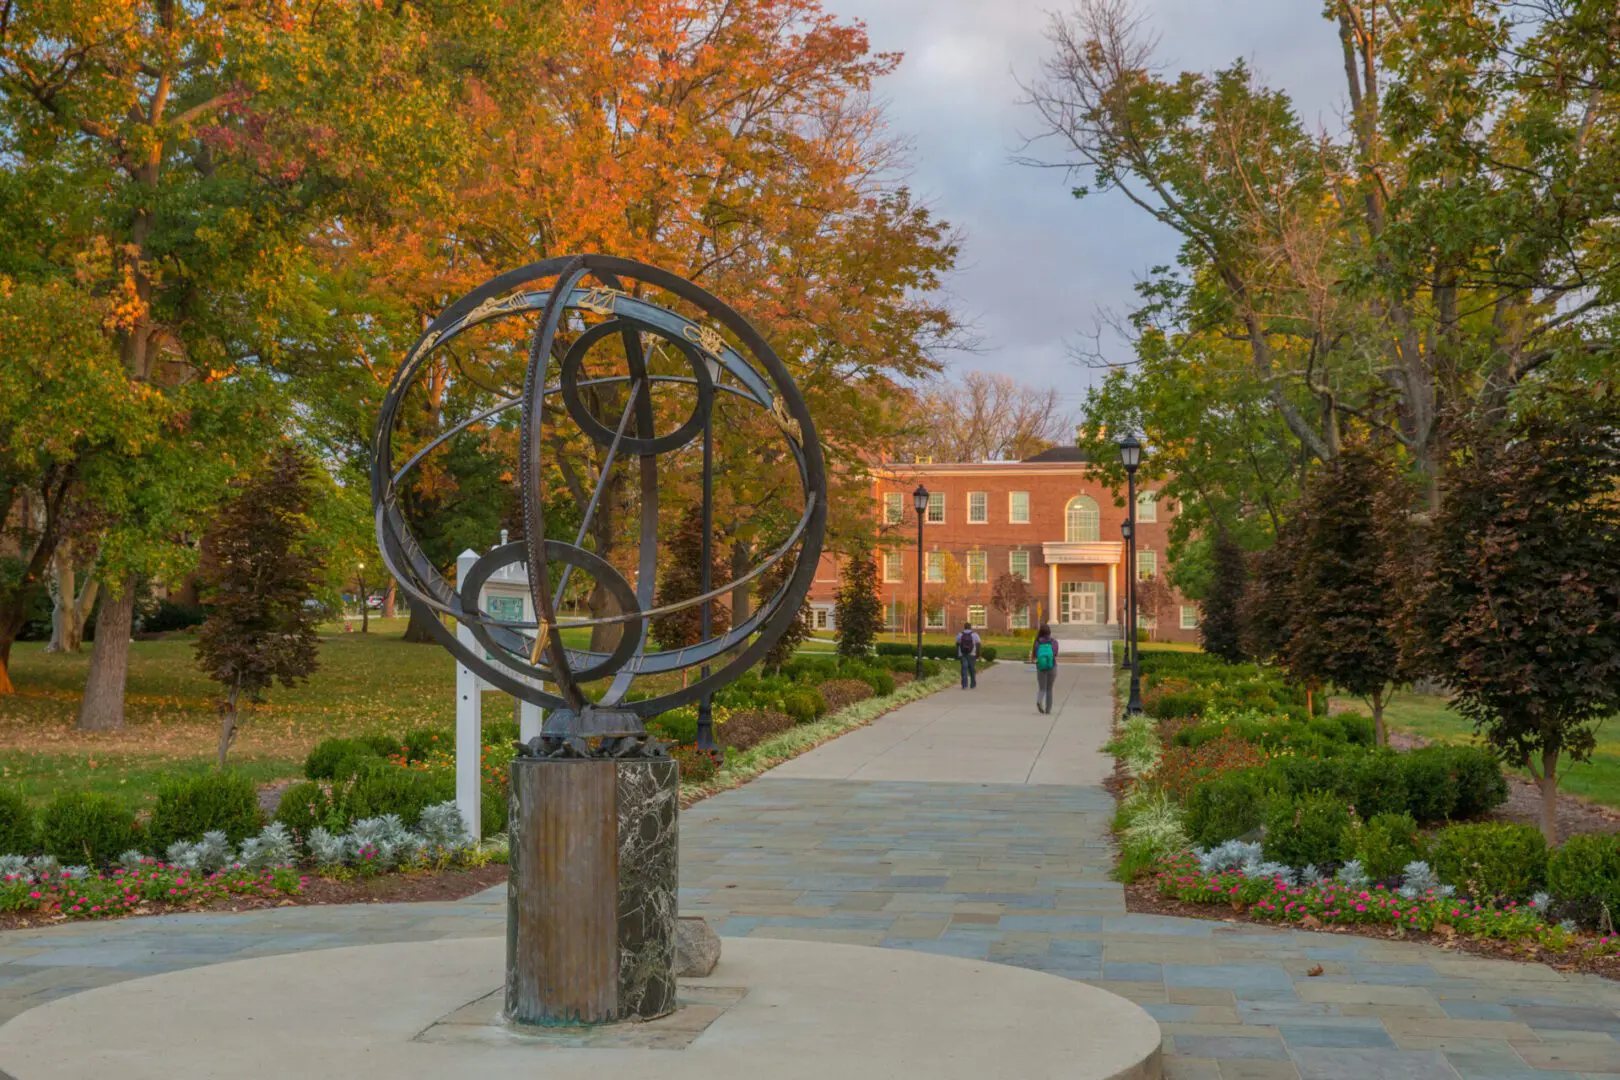 A statue of an armillary sphere in the middle of a park.